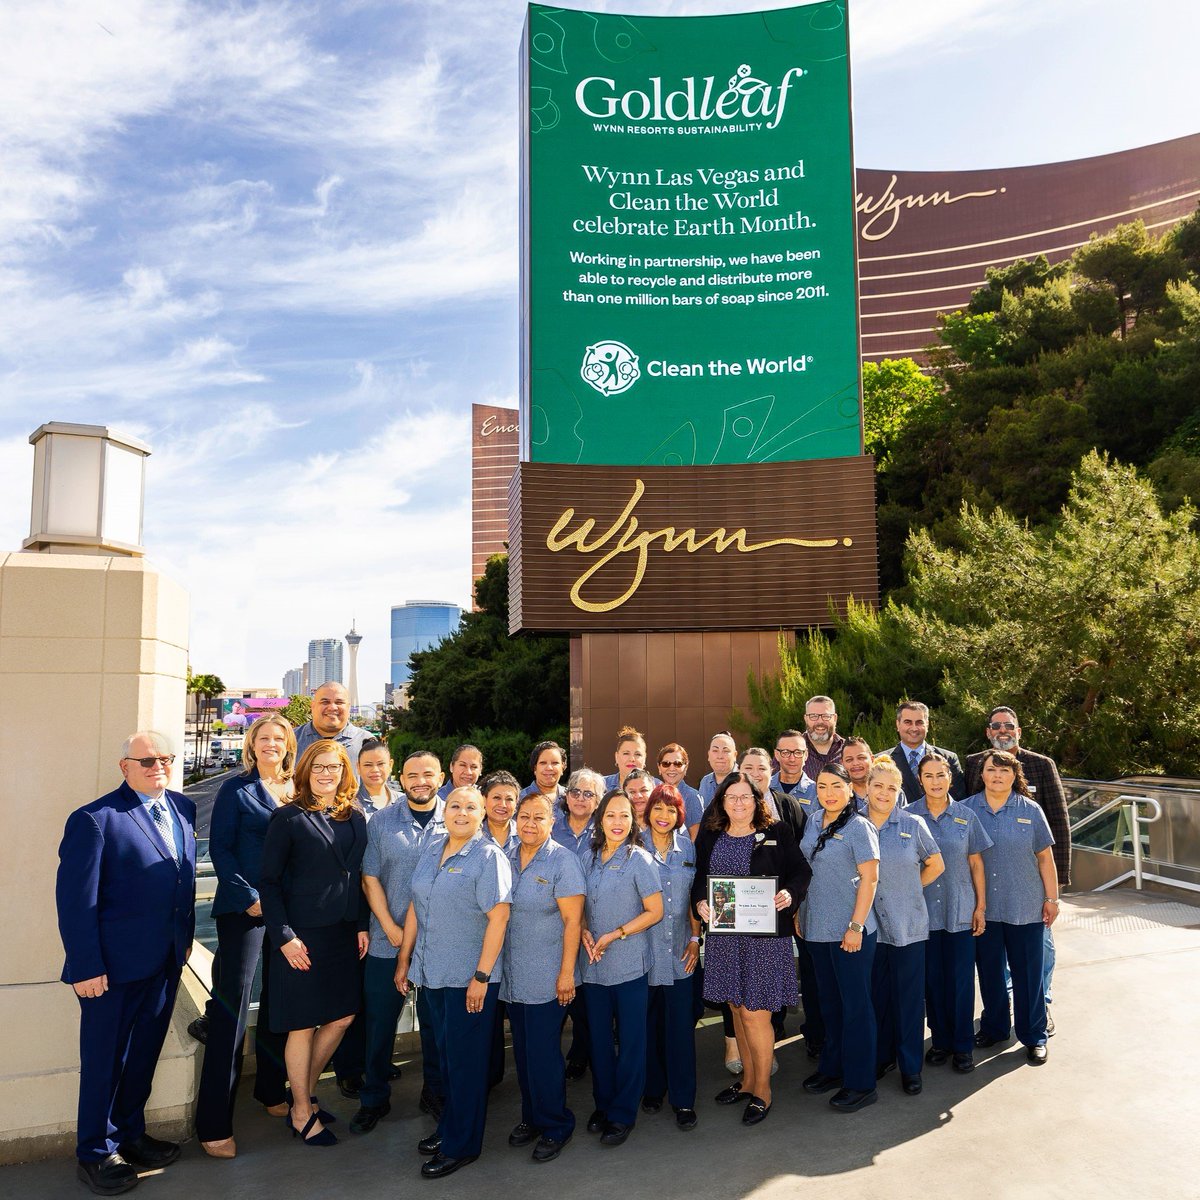 Thank you @WynnLasVegas for helping us make the world a better place. As partner in @Clean_the_World's Global Hospitality Recycling Program, they allow us to recycle their soap bars & divert their plastic amenity bottles from landfills. #maketheworldabetterplace #cleantheworld